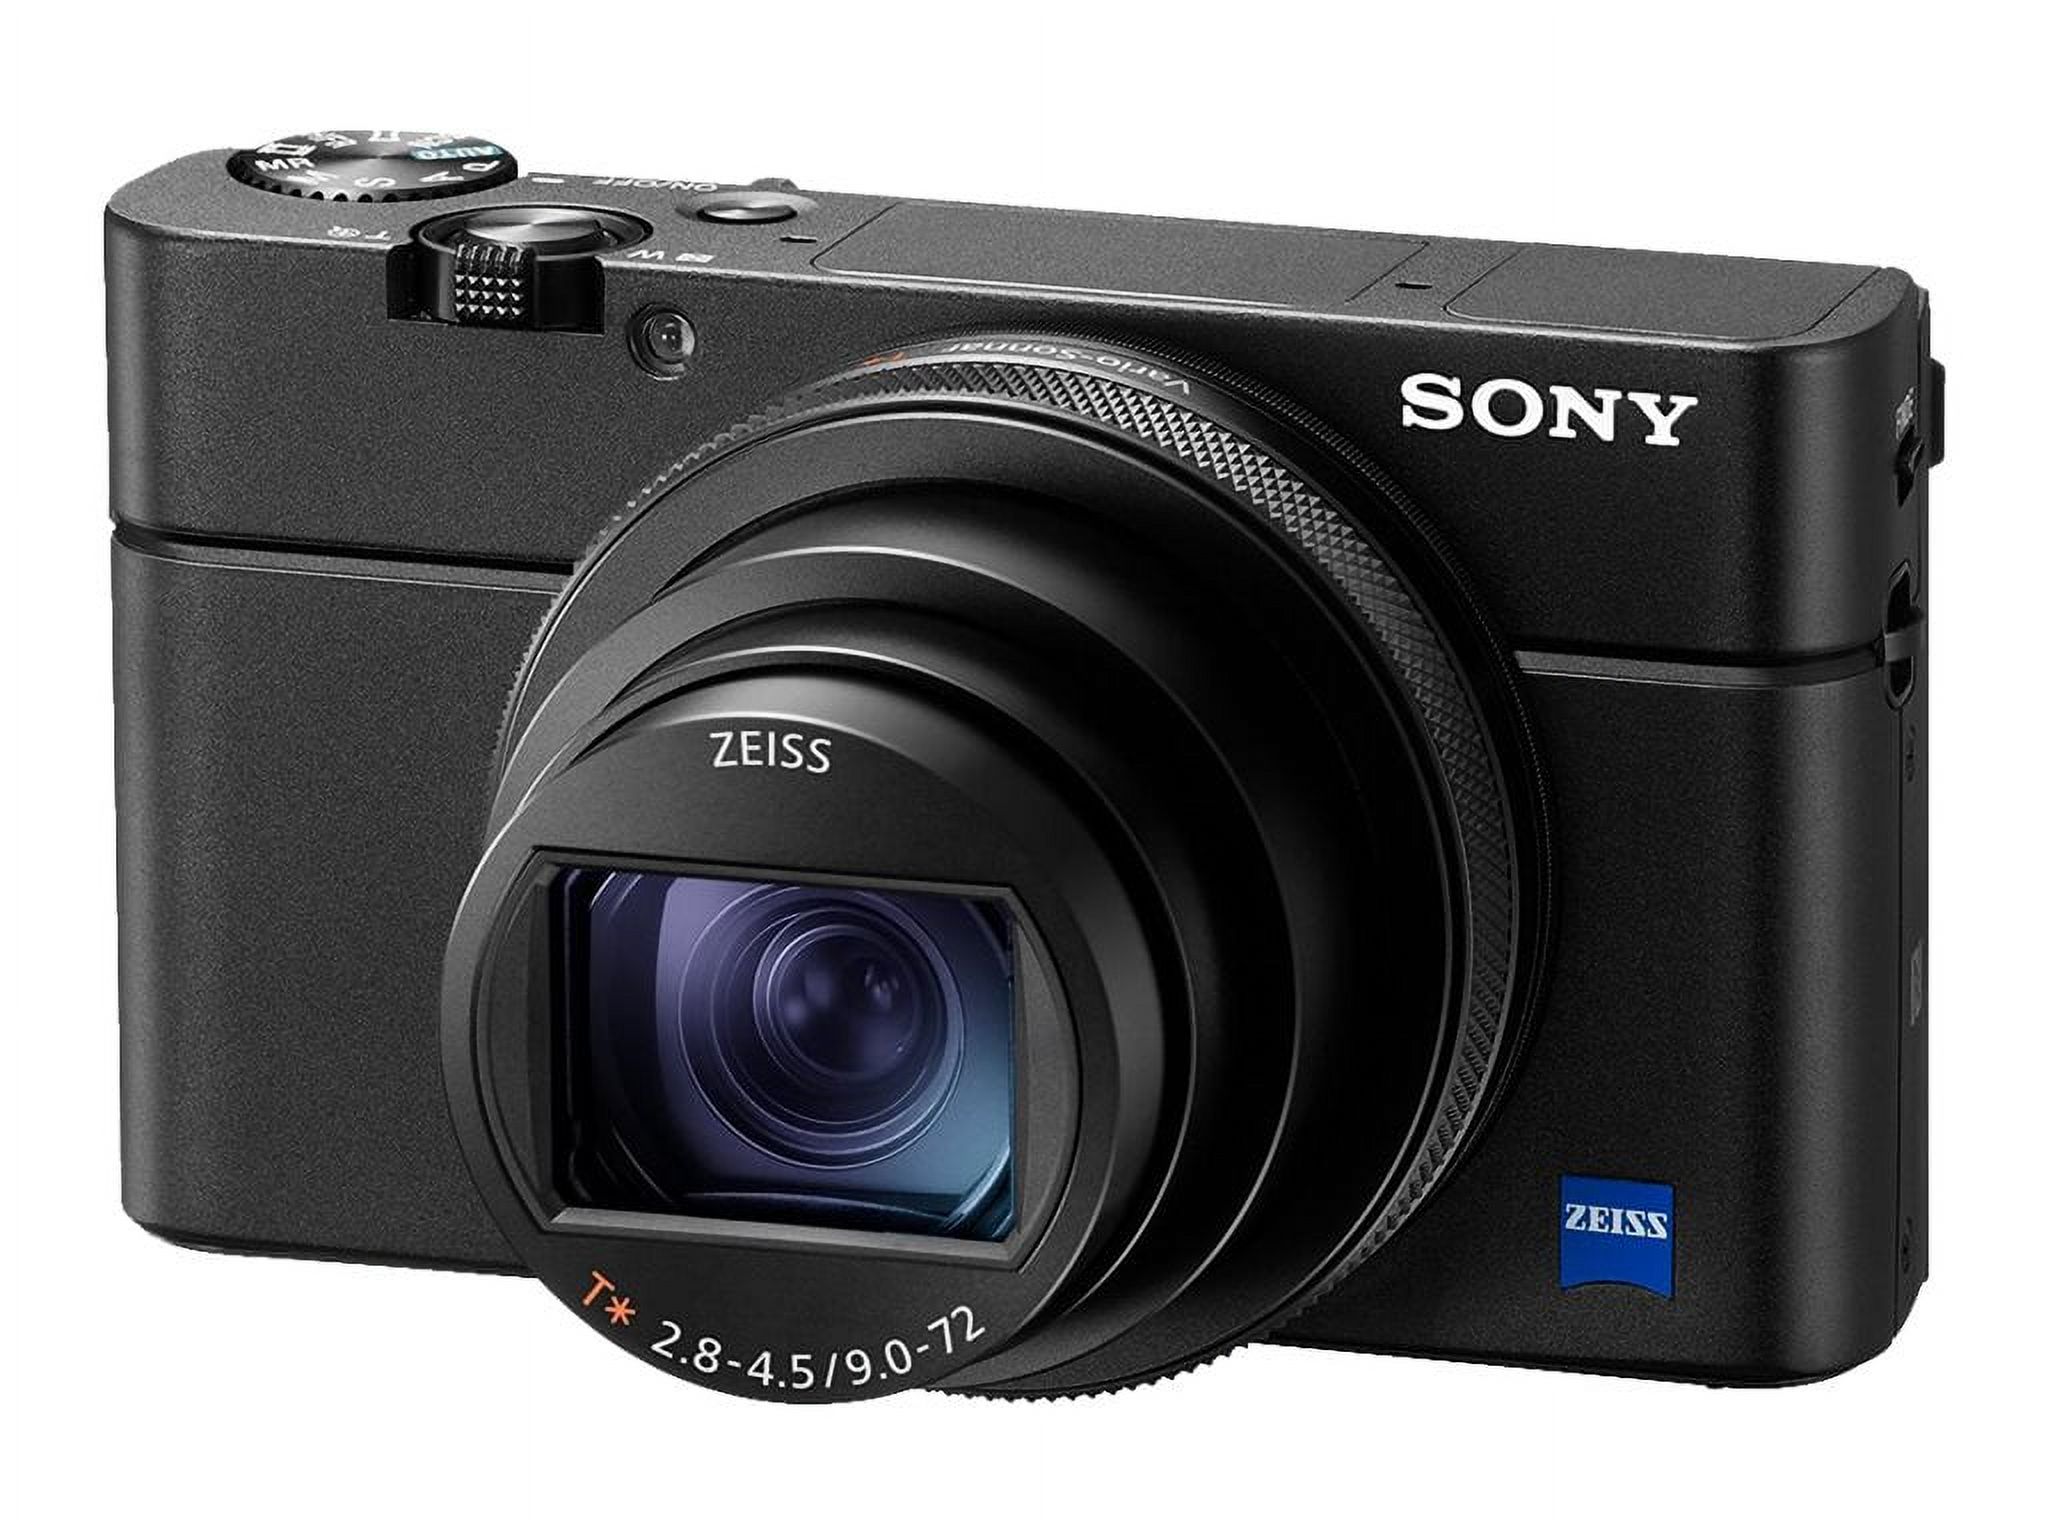 Sony Cyber-shot DSC-RX100 VII - Digital camera - compact - 20.1 MP - 4K / 30 fps - 8x optical zoom - ZEISS - Wi-Fi, NFC, Bluetooth - black - with Sony VCT-SGR1 Shooting Grip - image 3 of 15